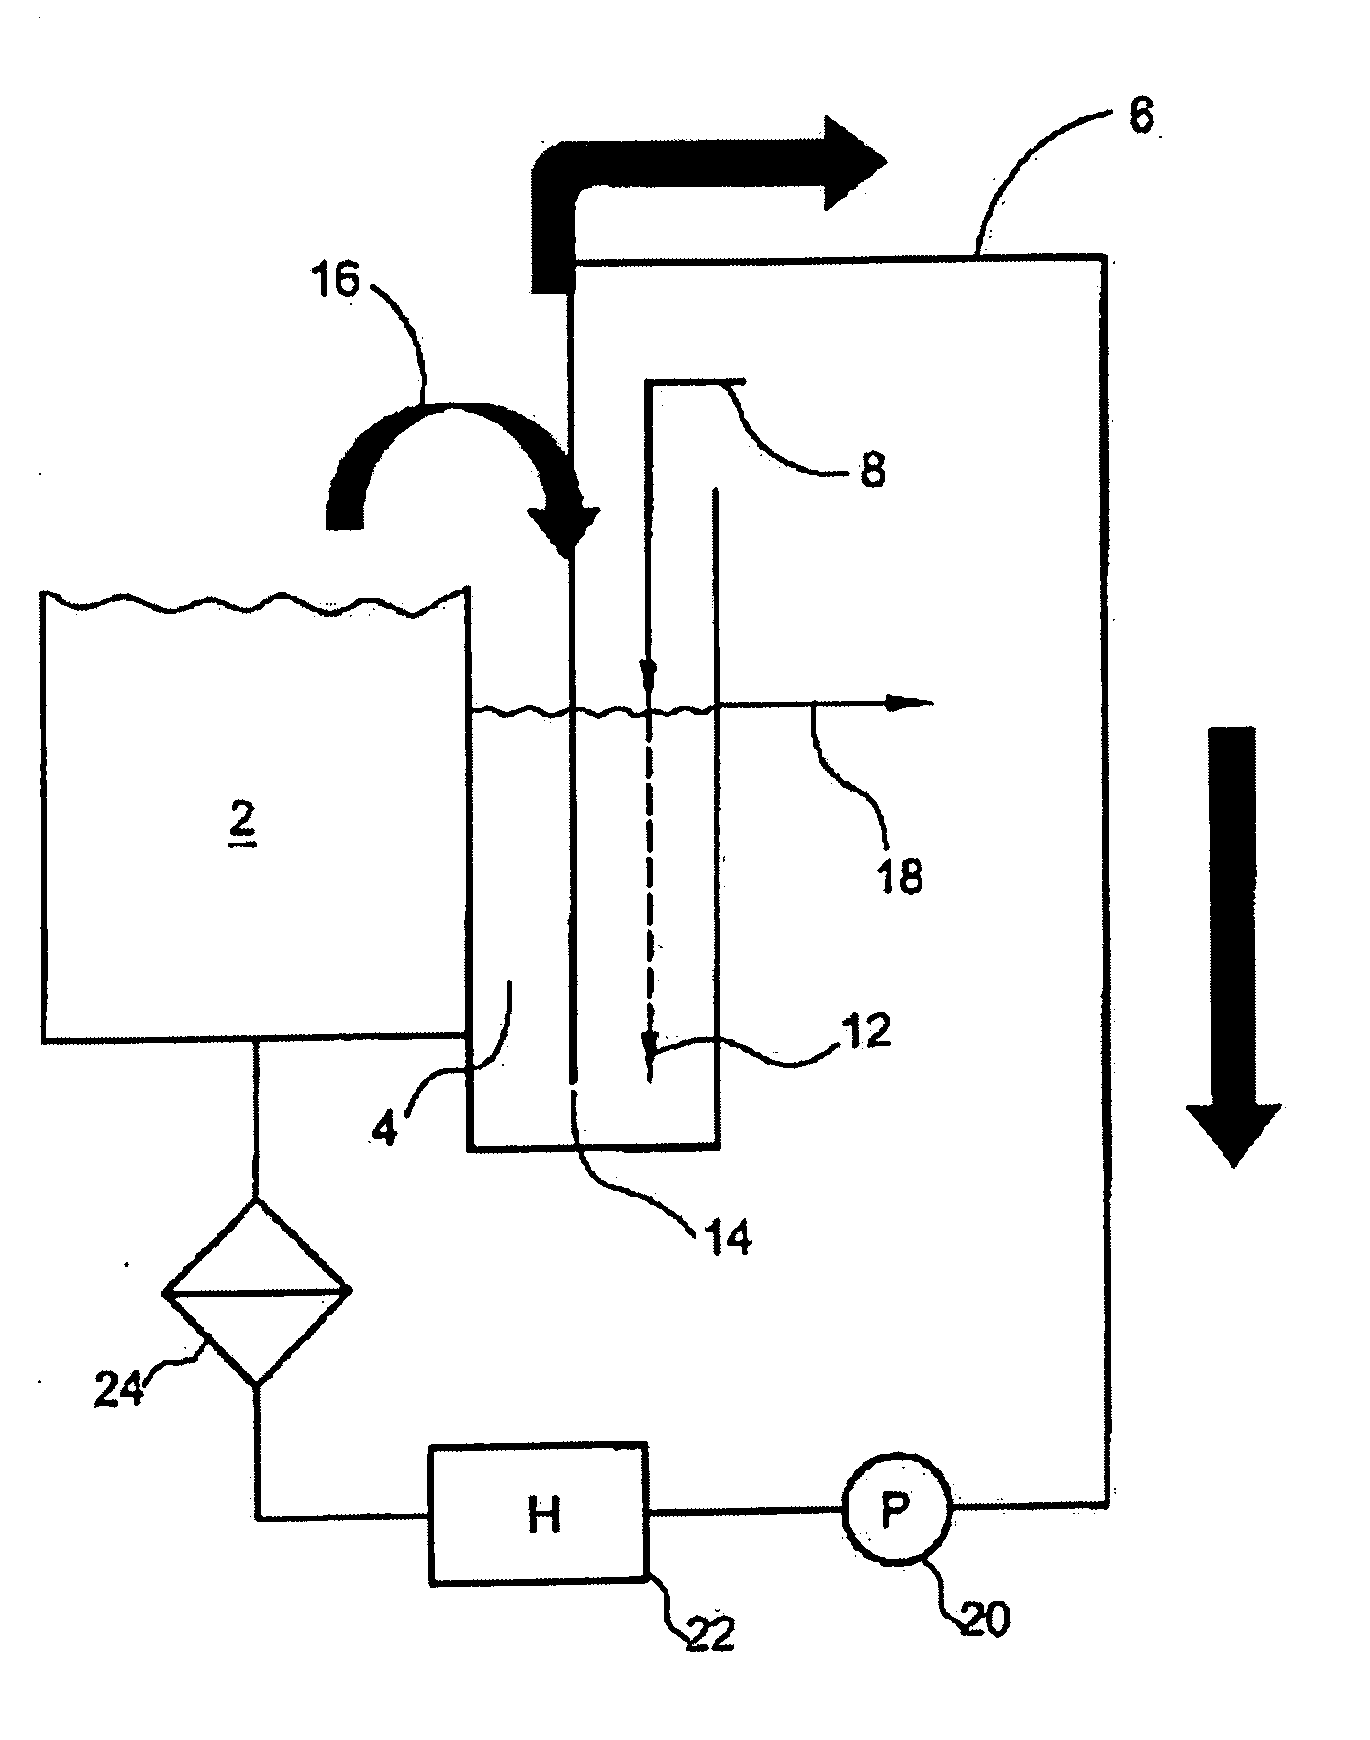 Method and system for improving wet chemical bath process stability and productivity in semiconductor manufacturing